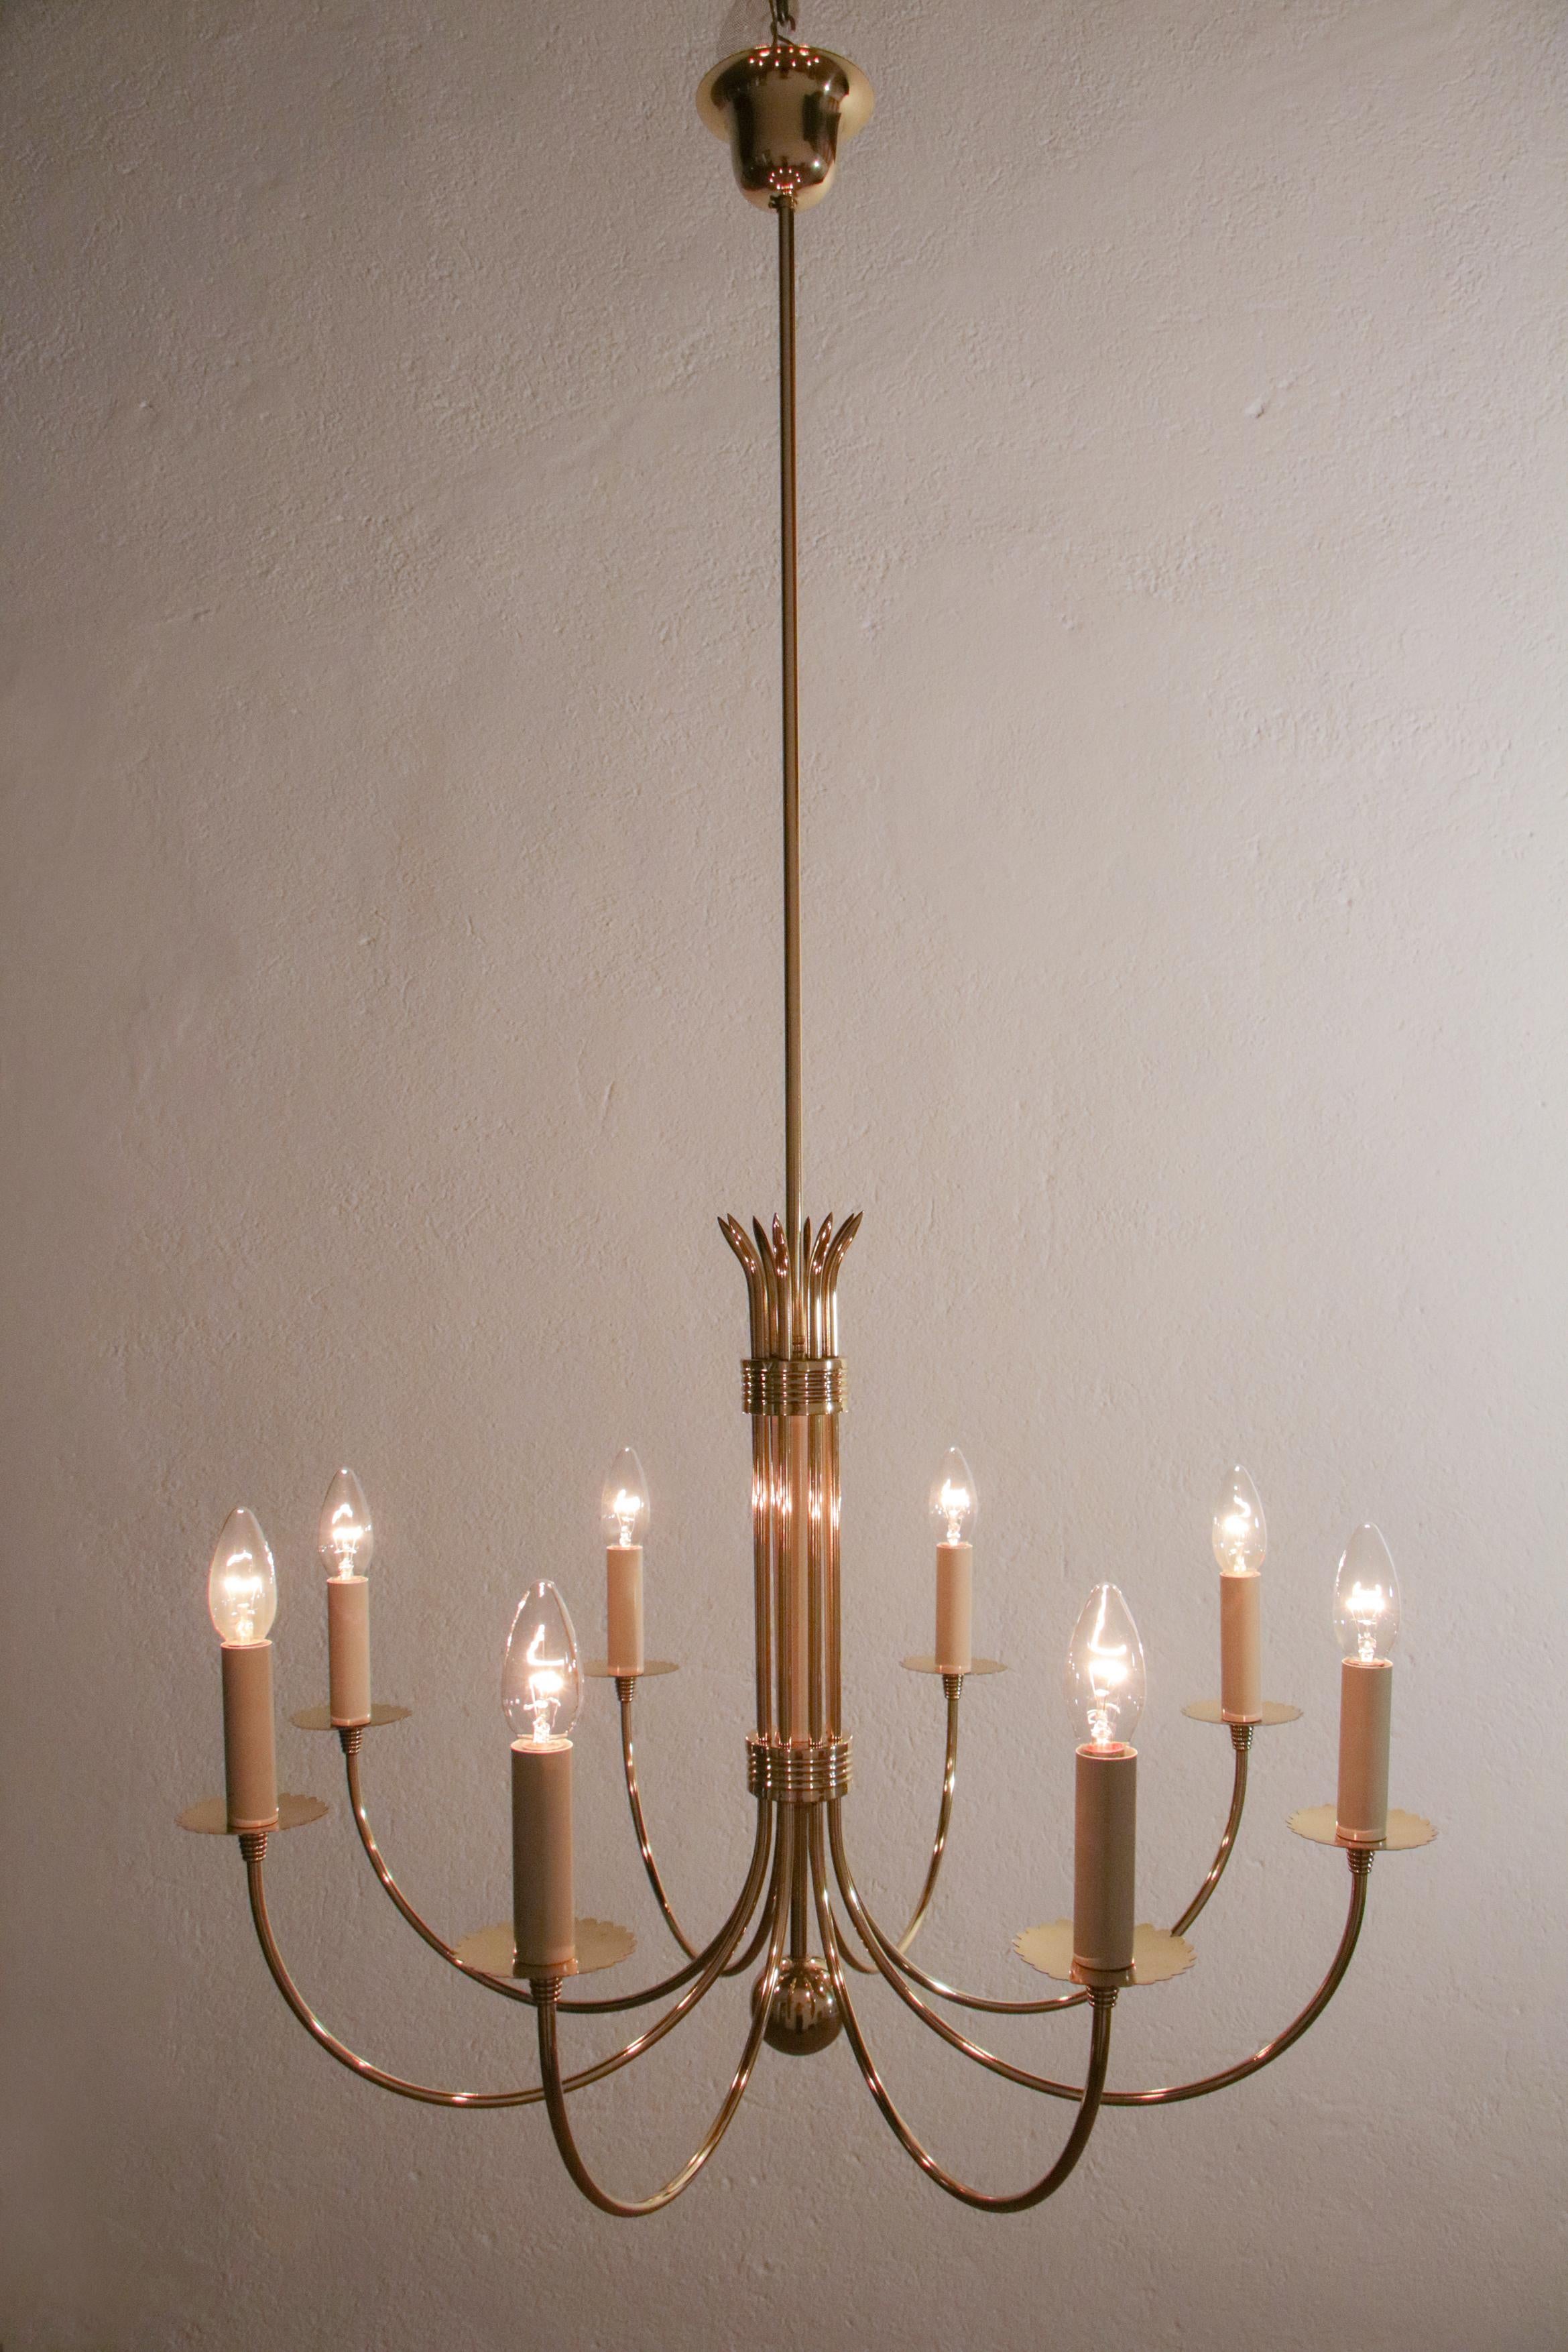 Italian Mid-Century Chandelier Attributed to Guglielmo Ulrich, 1945s For Sale 4